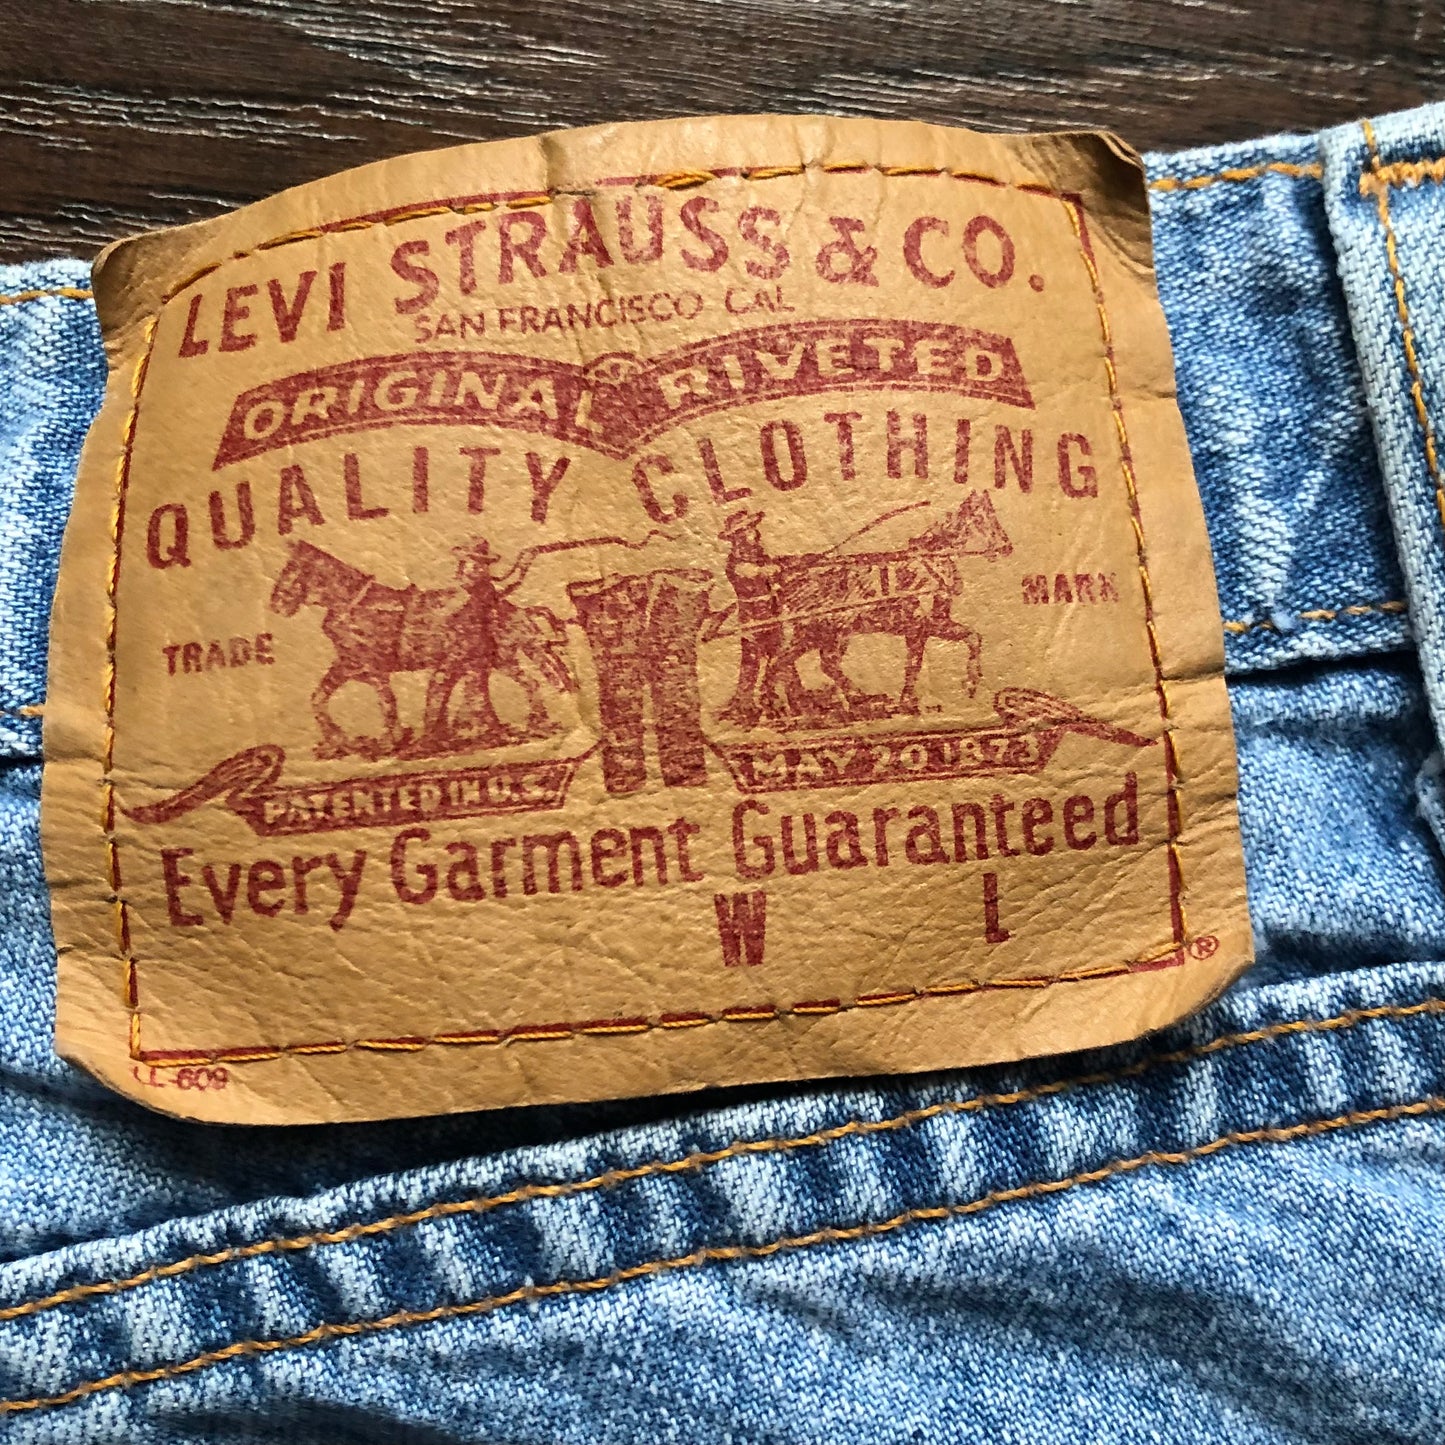 90's Vintage Levis Misses Denim Hand Embroidered Pockets Cutoff Shorts | Made in USA